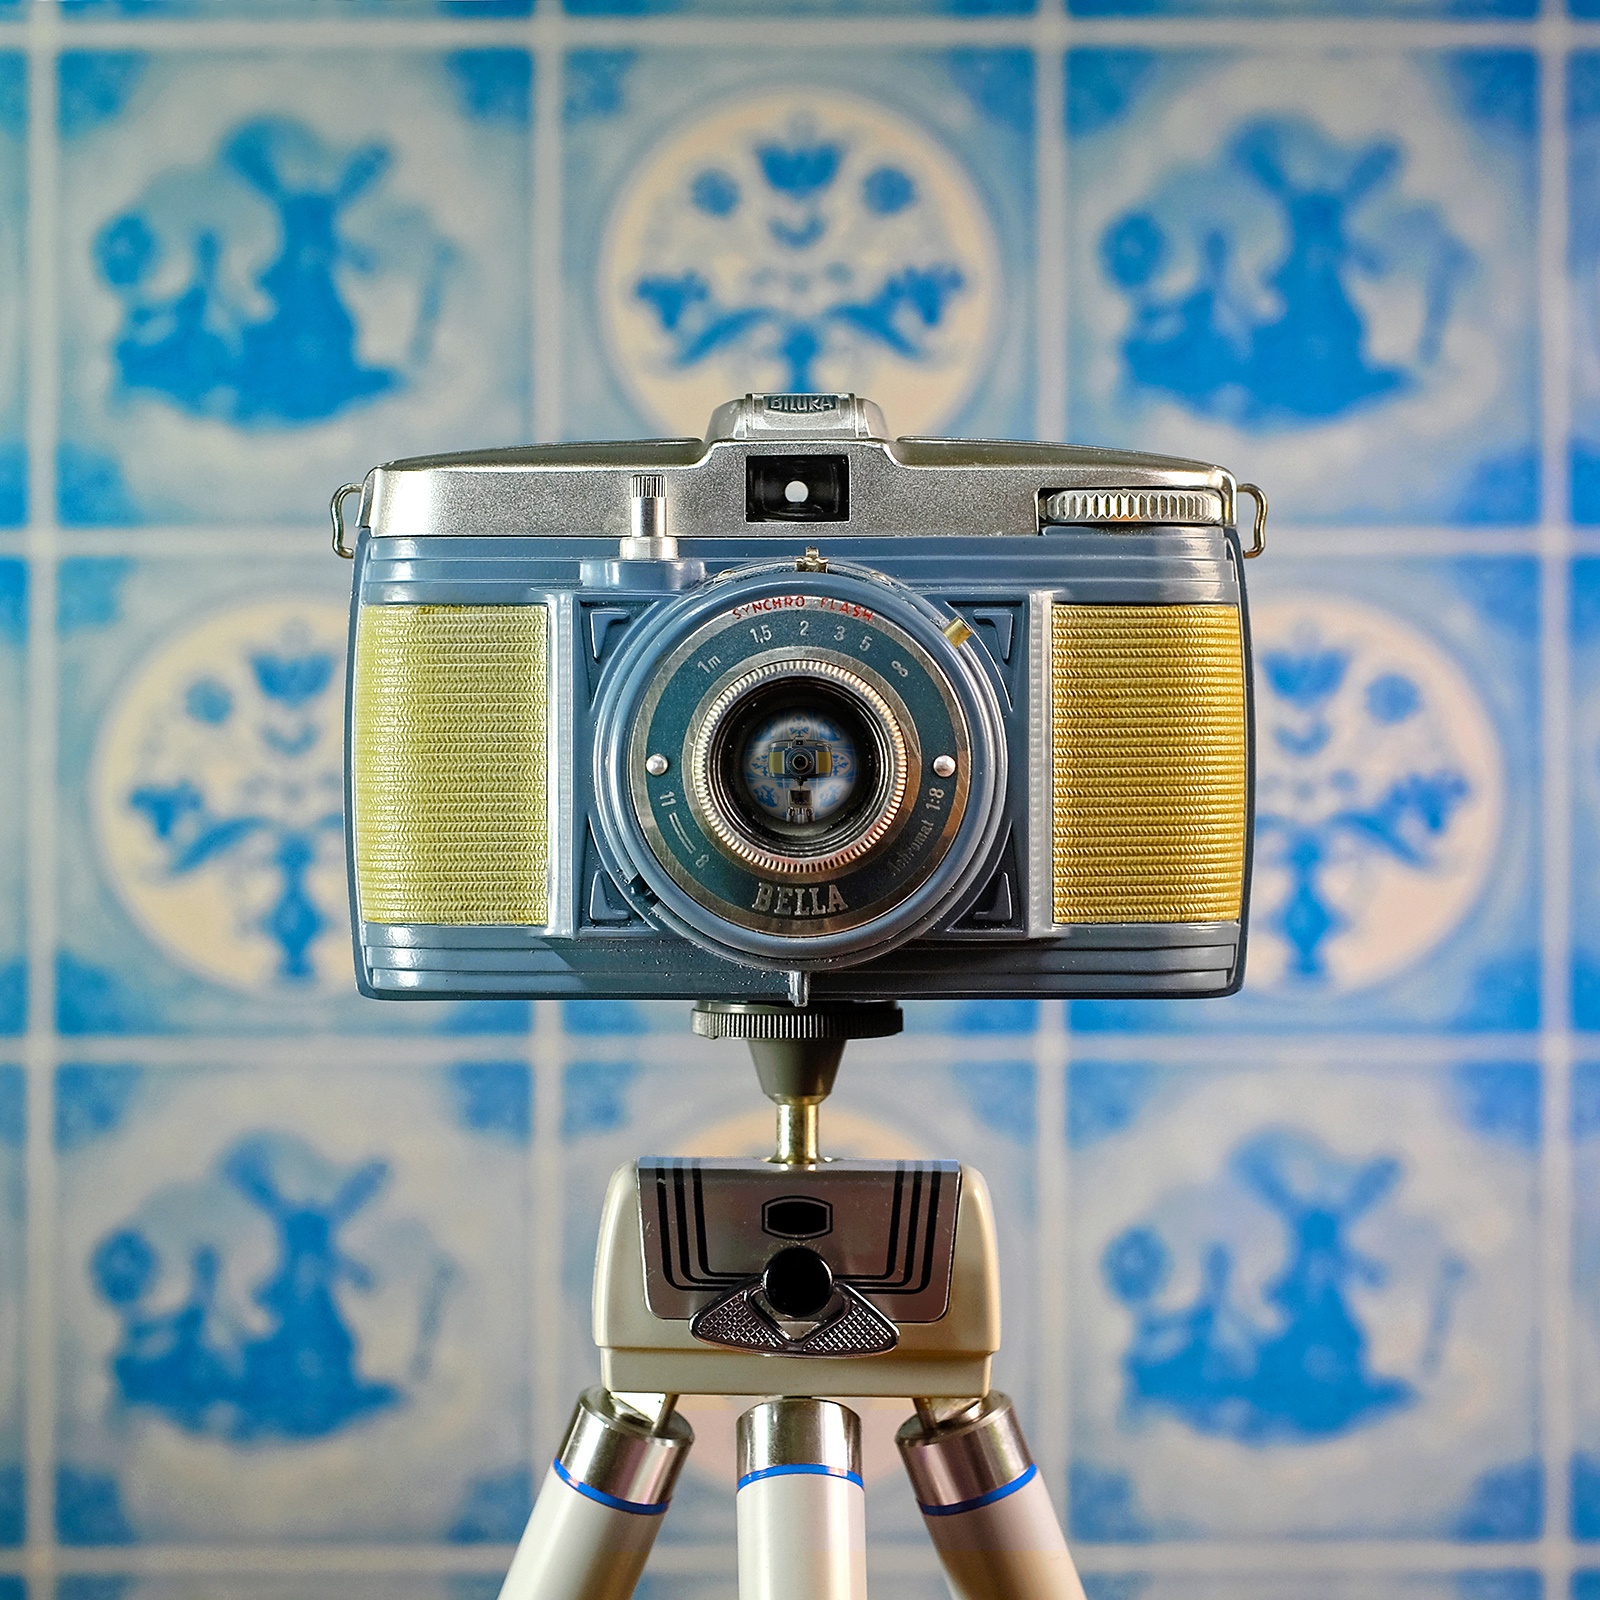 CameraSelfies: Vintage Cameras Join the Selfie Craze in Quirky 'Self-Portrait' Project